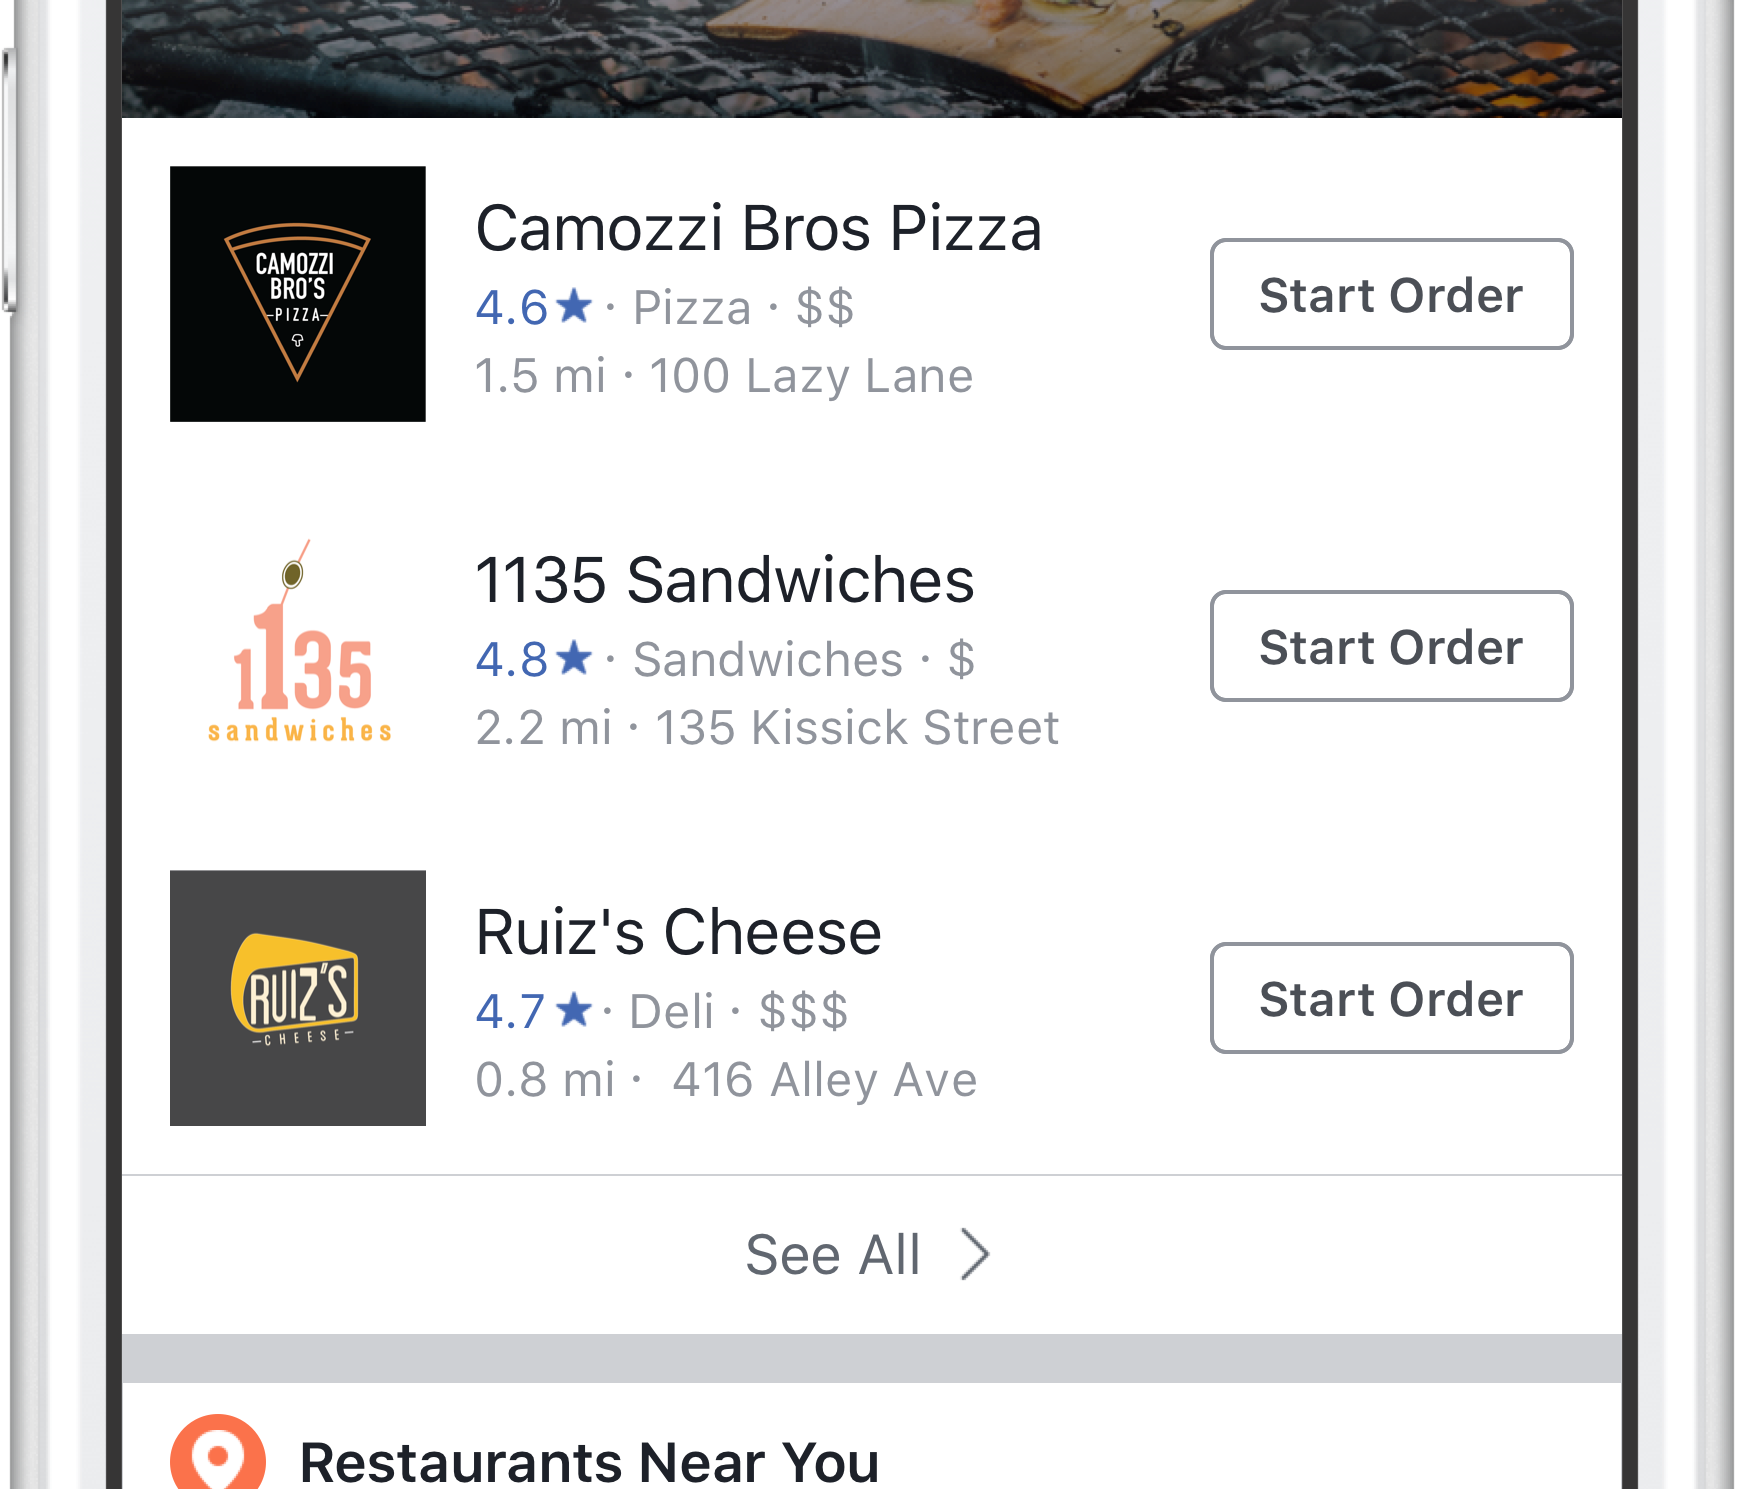 Facebook is expanding its food ordering service